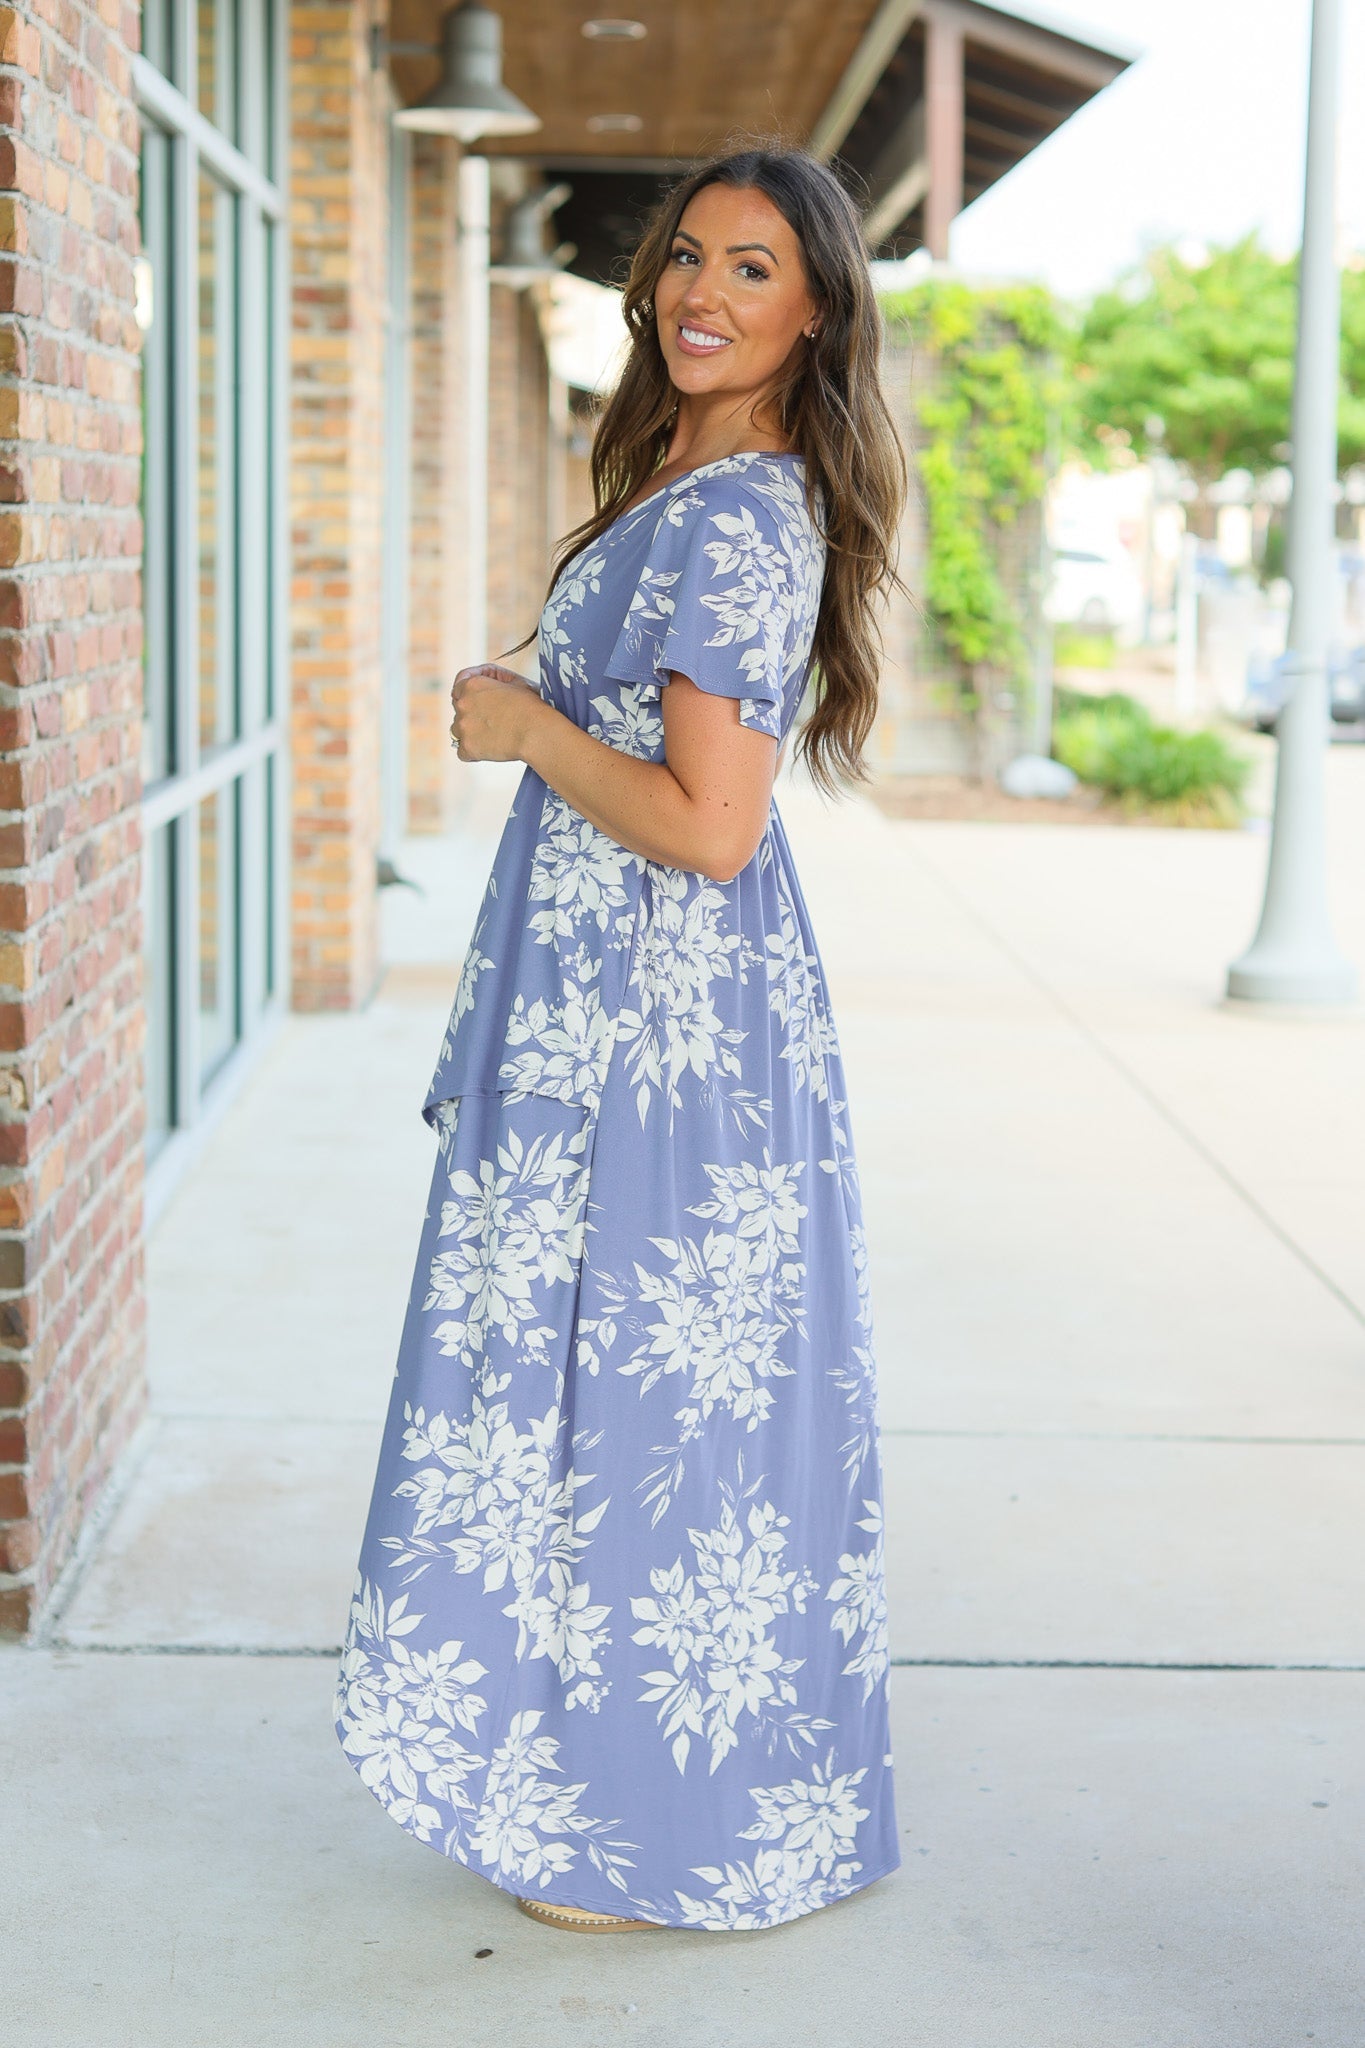 IN STOCK Harley High-Lo Dress - Periwinkle Floral